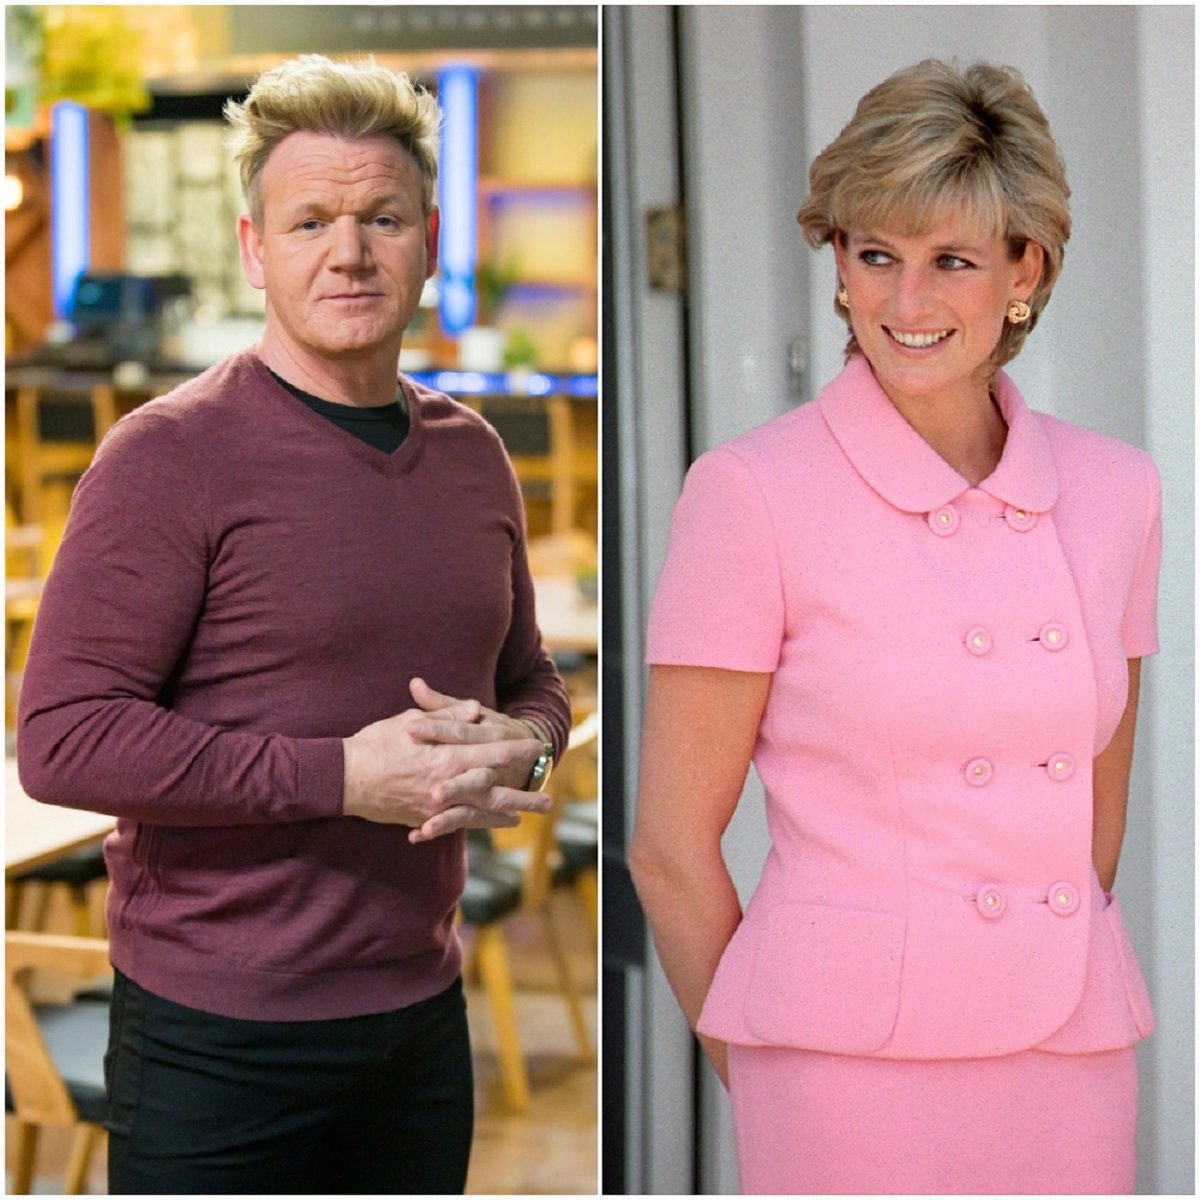 Gordon Ramsay Reveals the Meal He Once Made for His ‘Dream Dinner Date’ Princess Diana